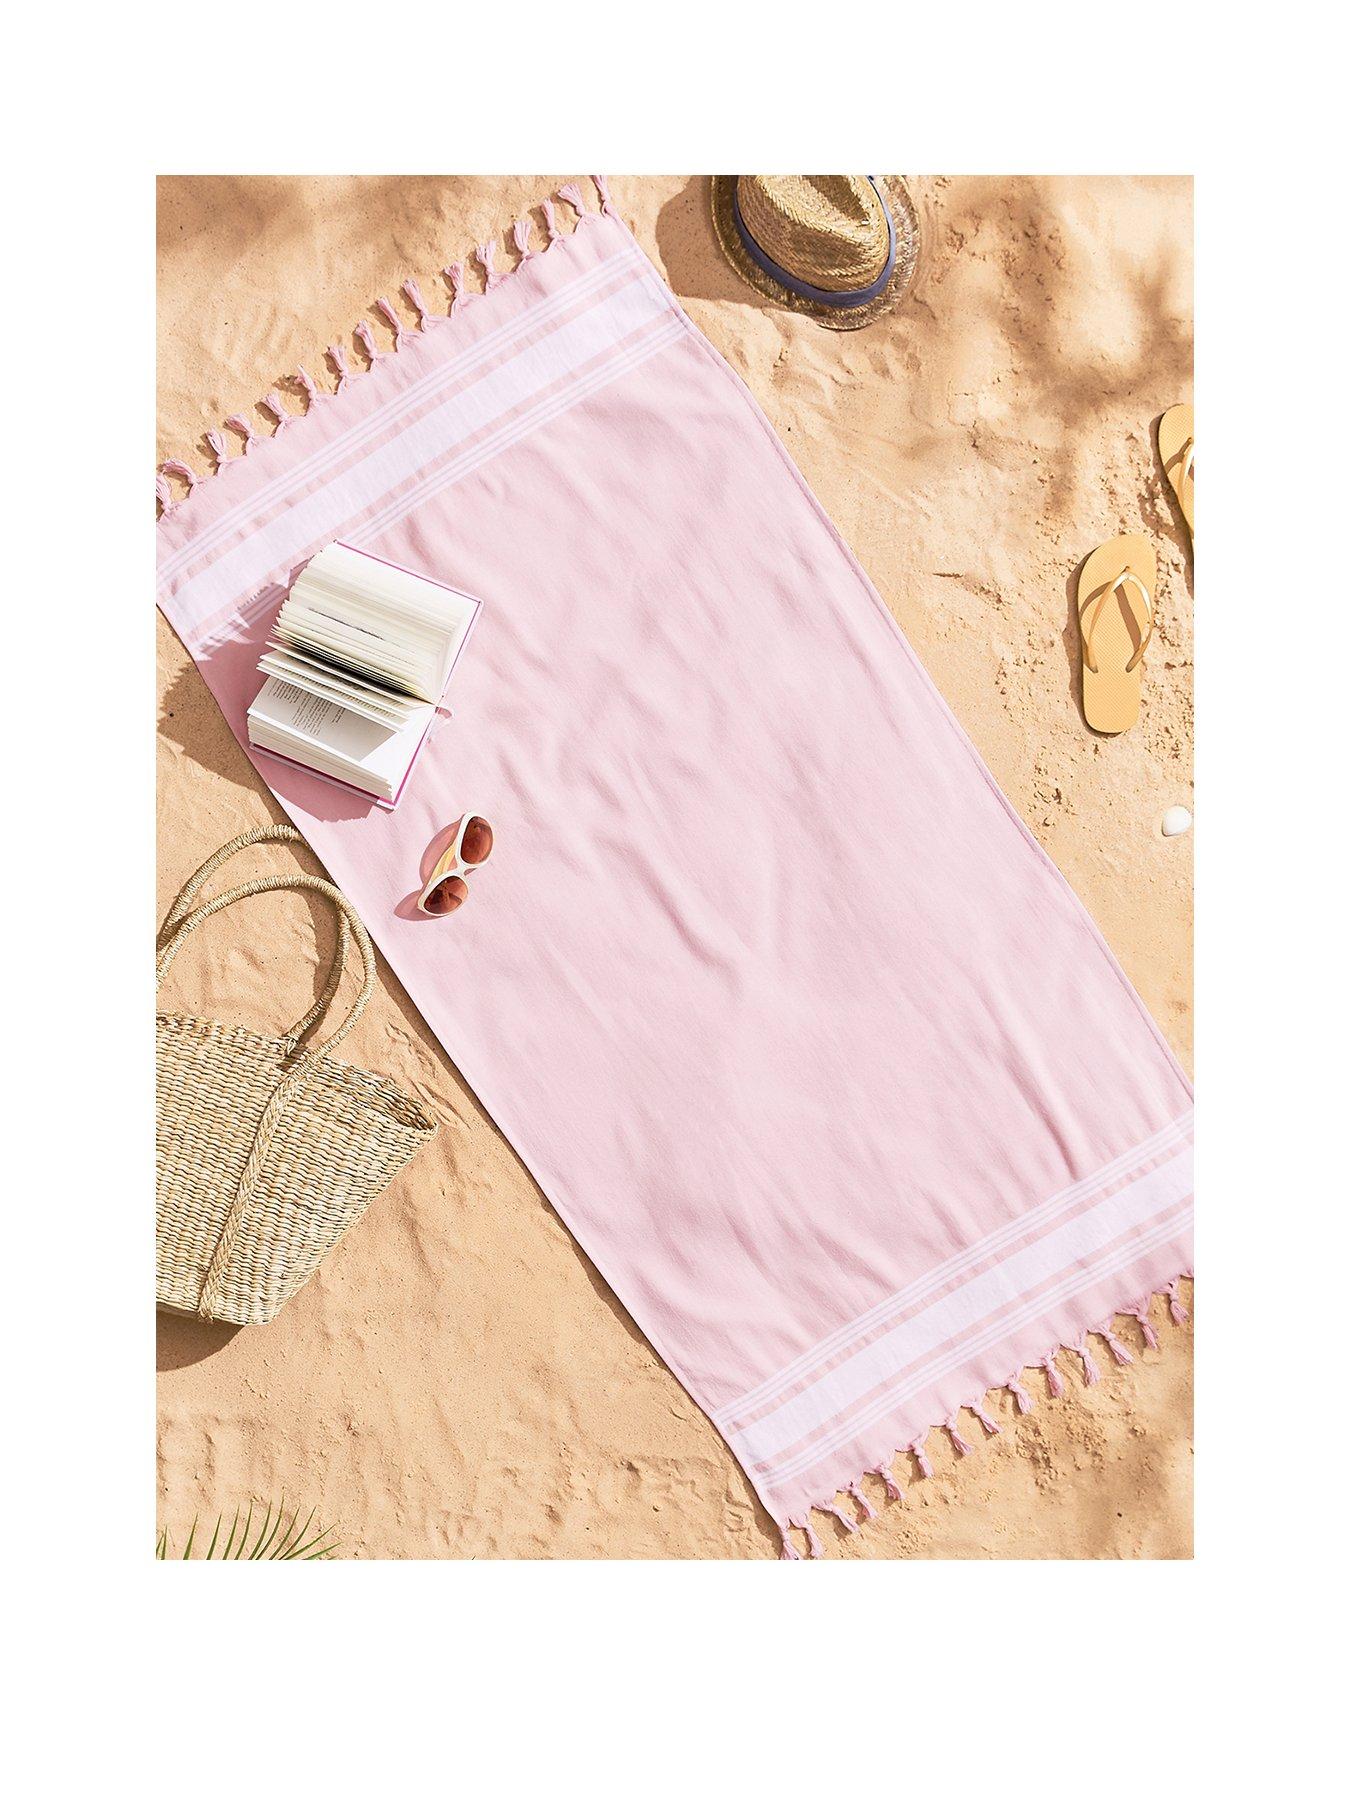 Product photograph of Catherine Lansfield Hammam Beach Towel- Pink from very.co.uk